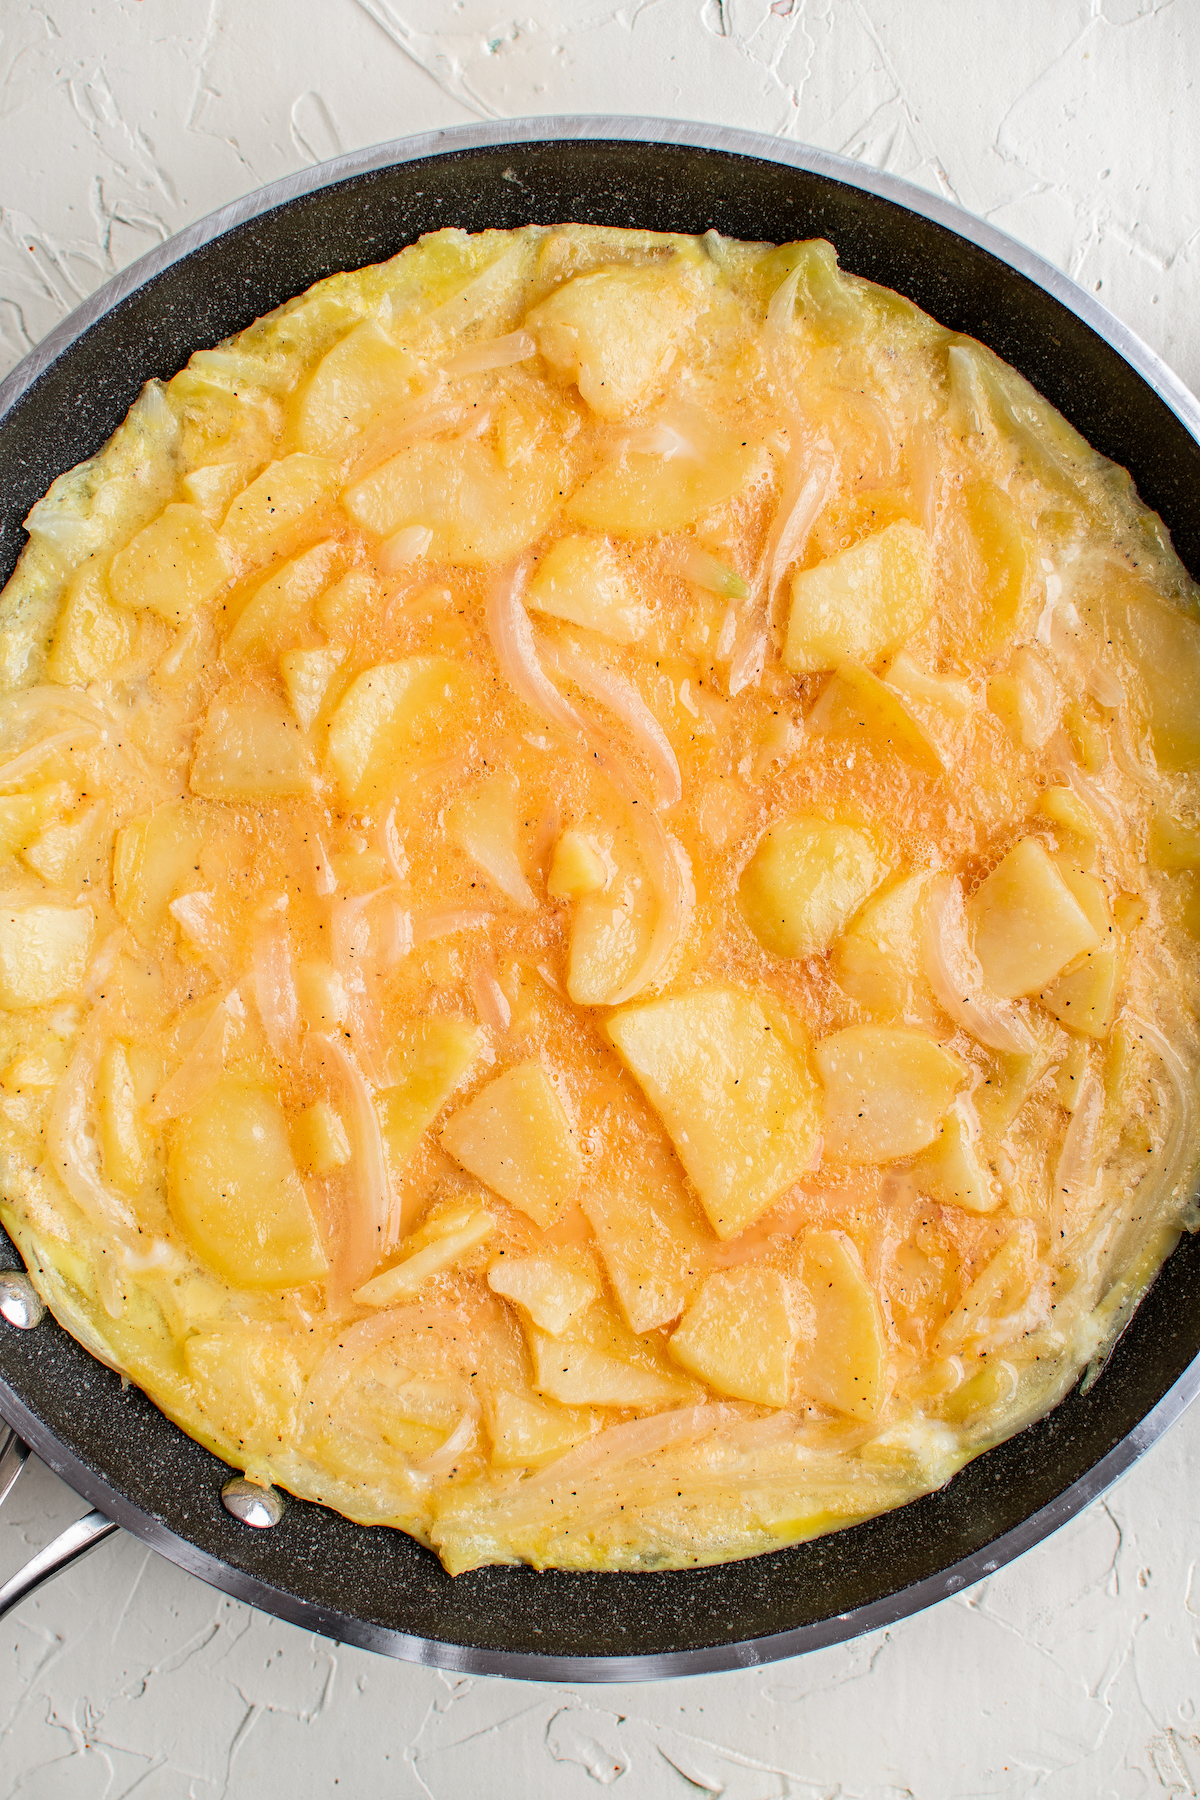 A skillet with uncooked beaten eggs, potatoes, and onions in it